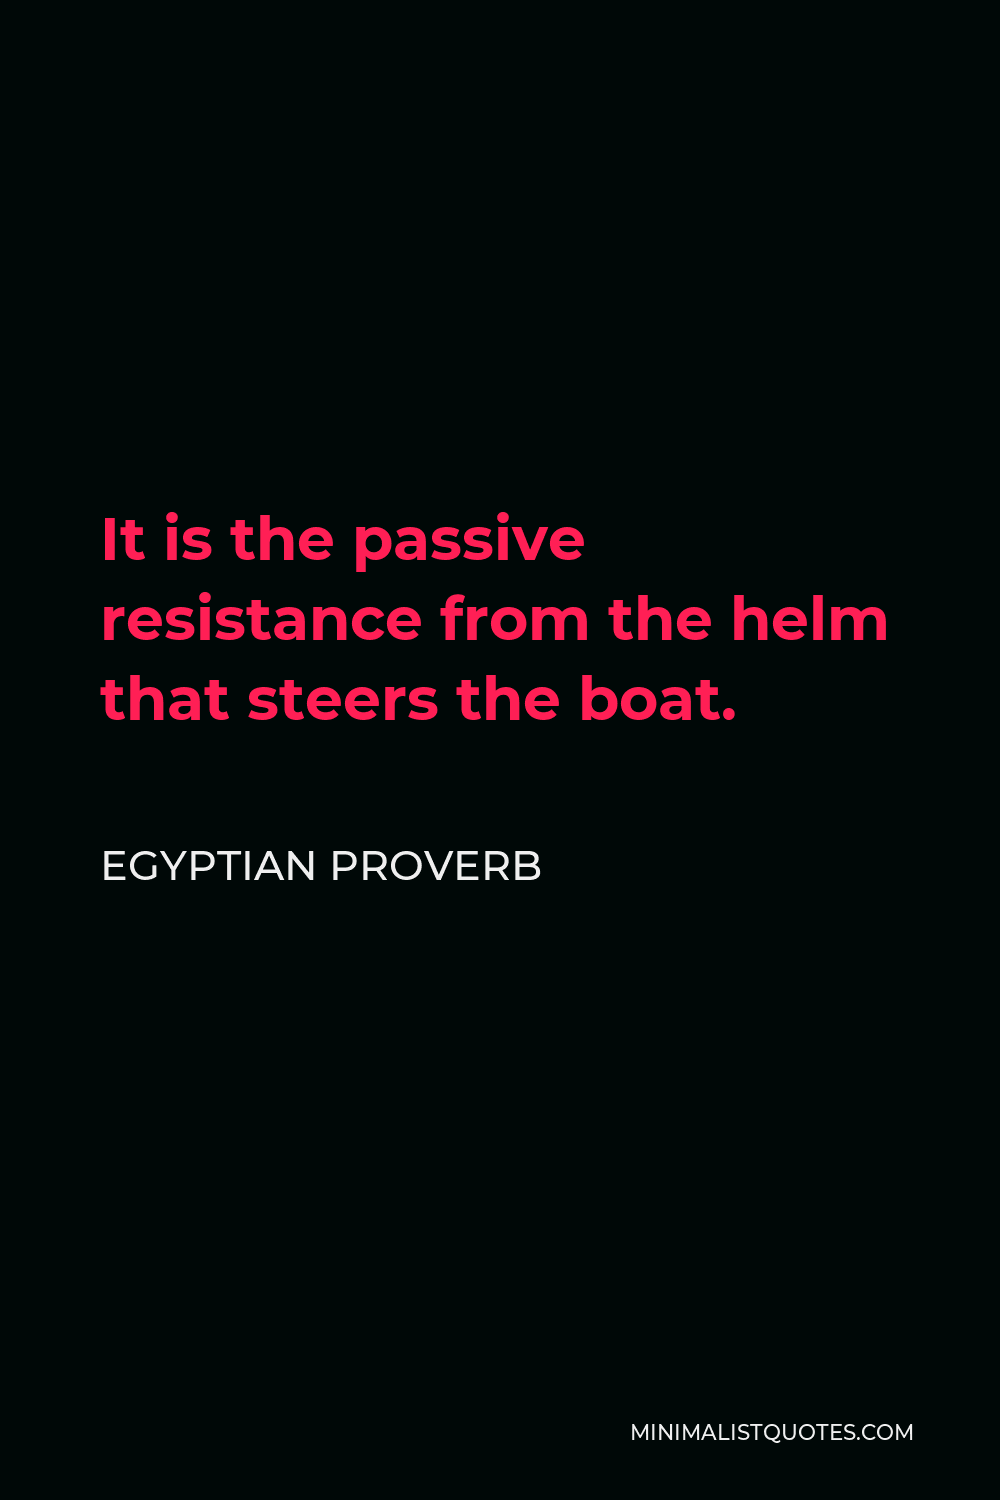 Egyptian Proverb Quote - It is the passive resistance from the helm that steers the boat.